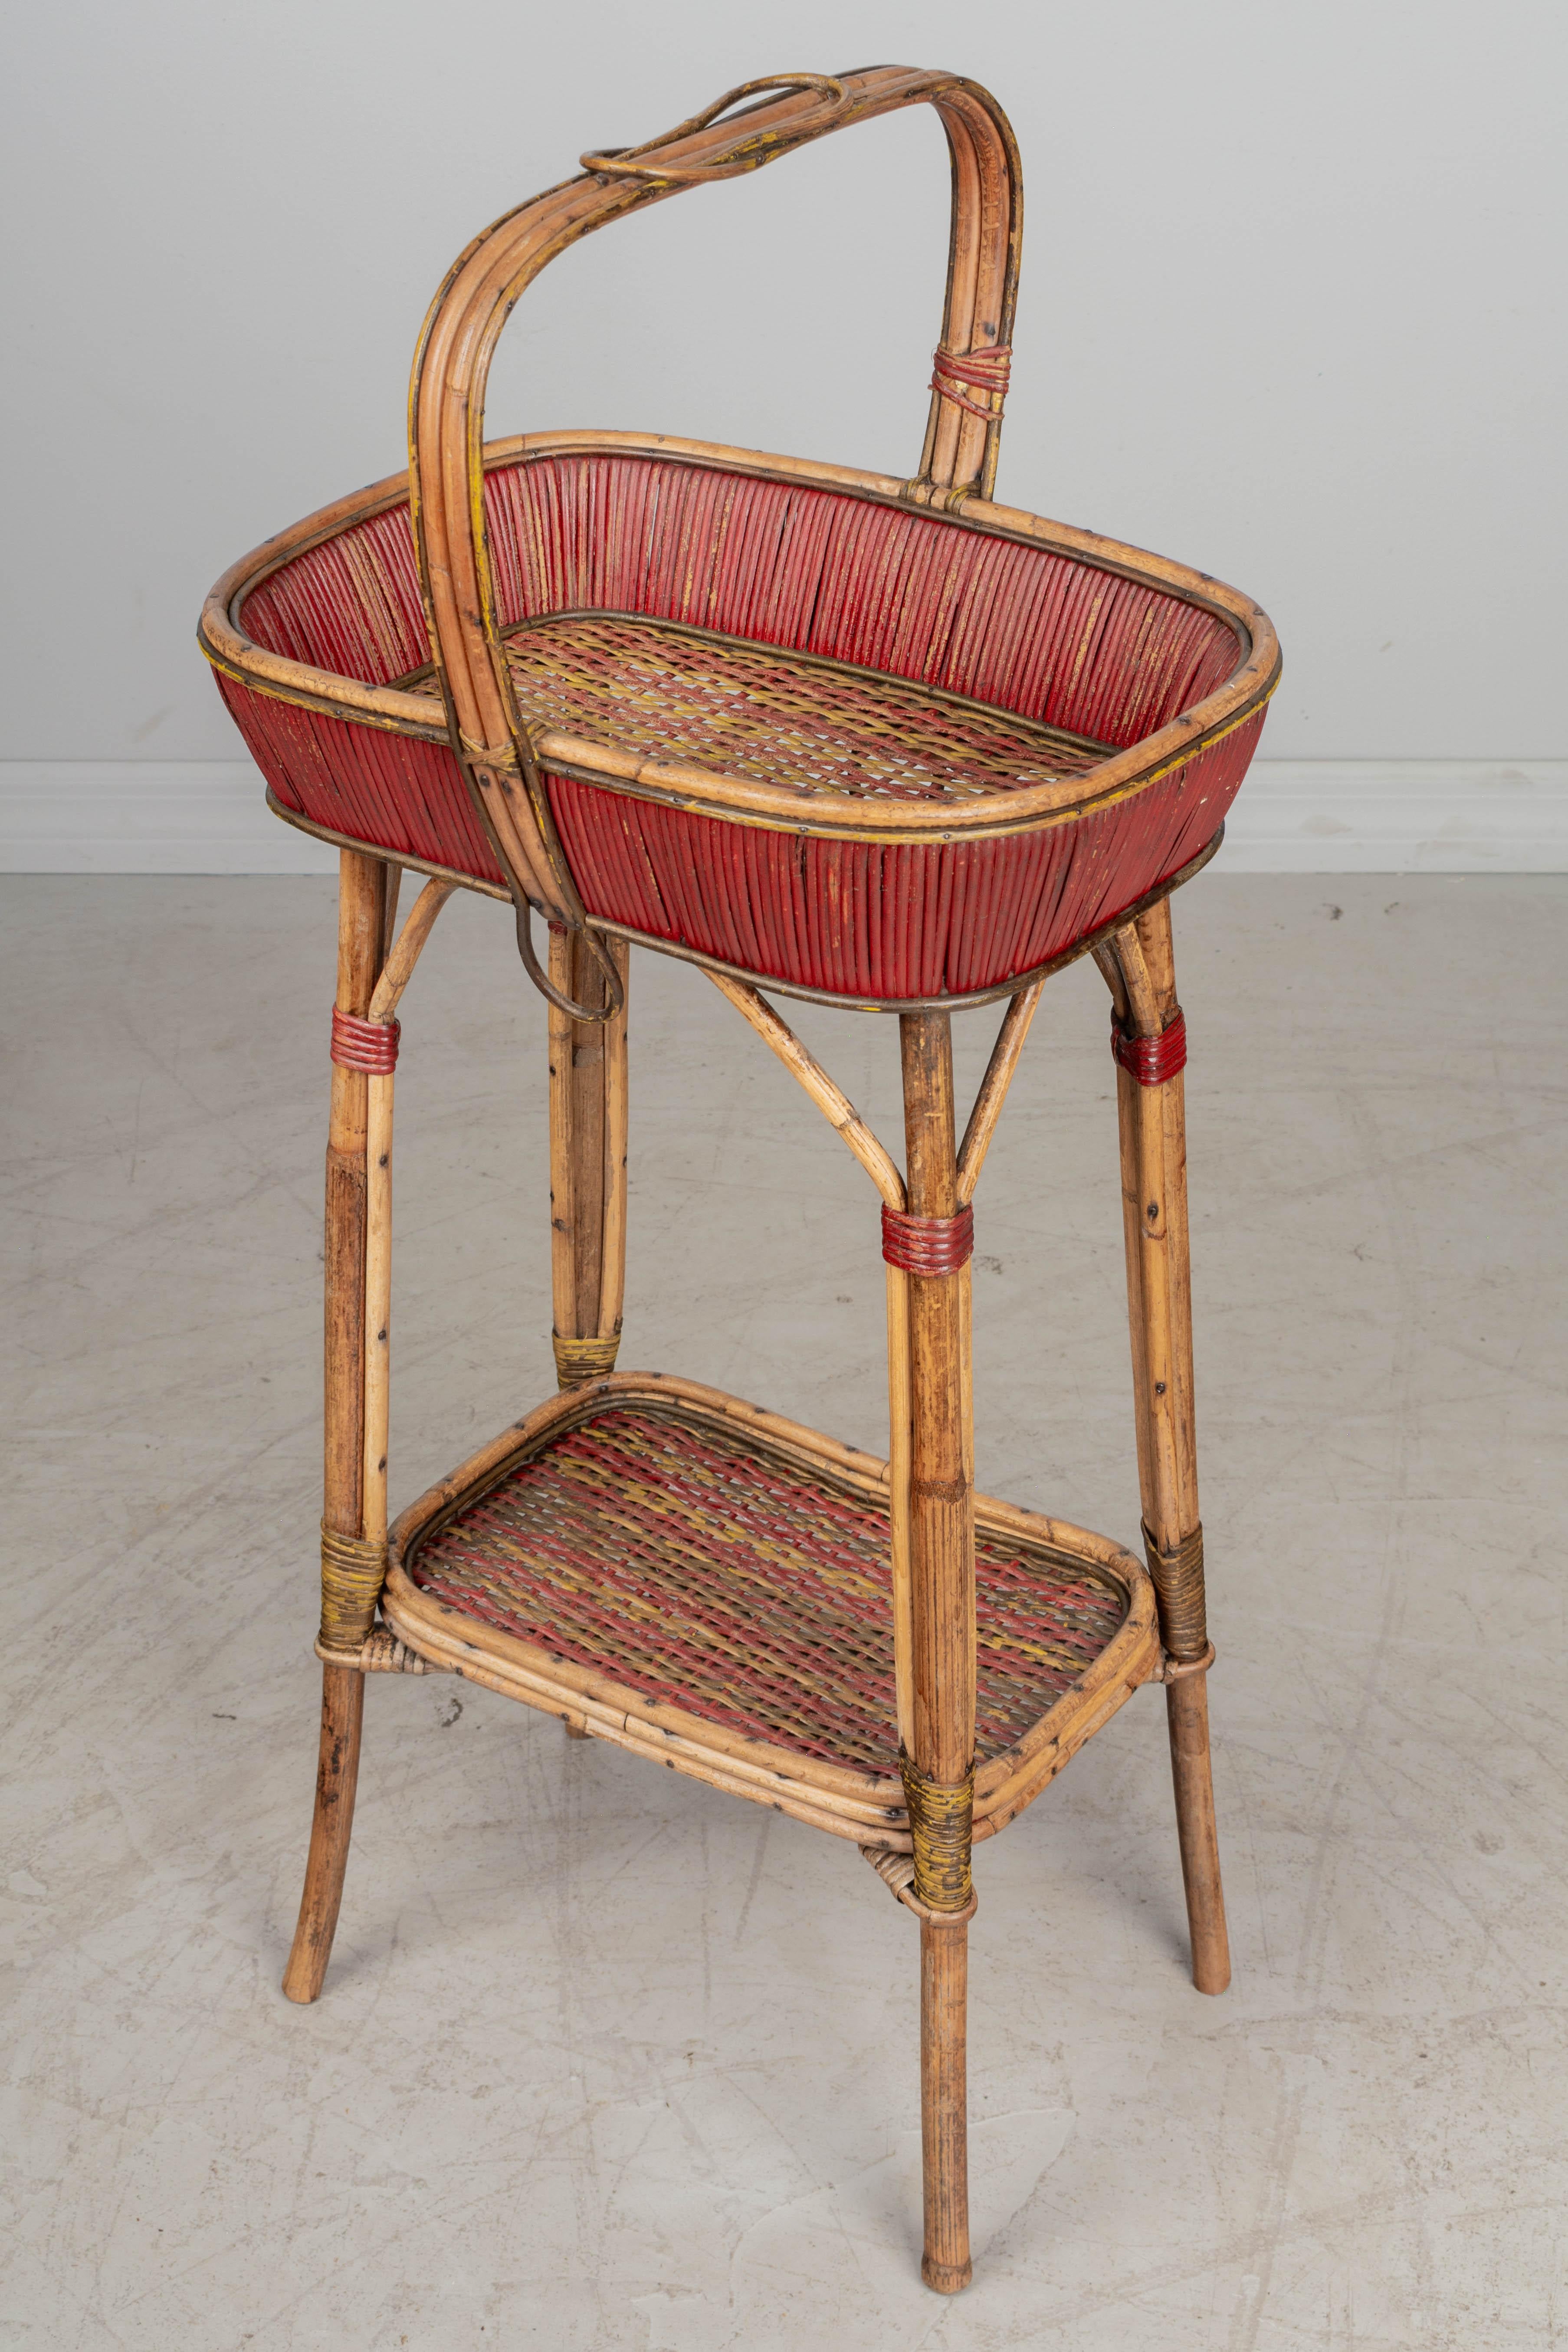 19th Century French Wicker Stand In Good Condition For Sale In Winter Park, FL